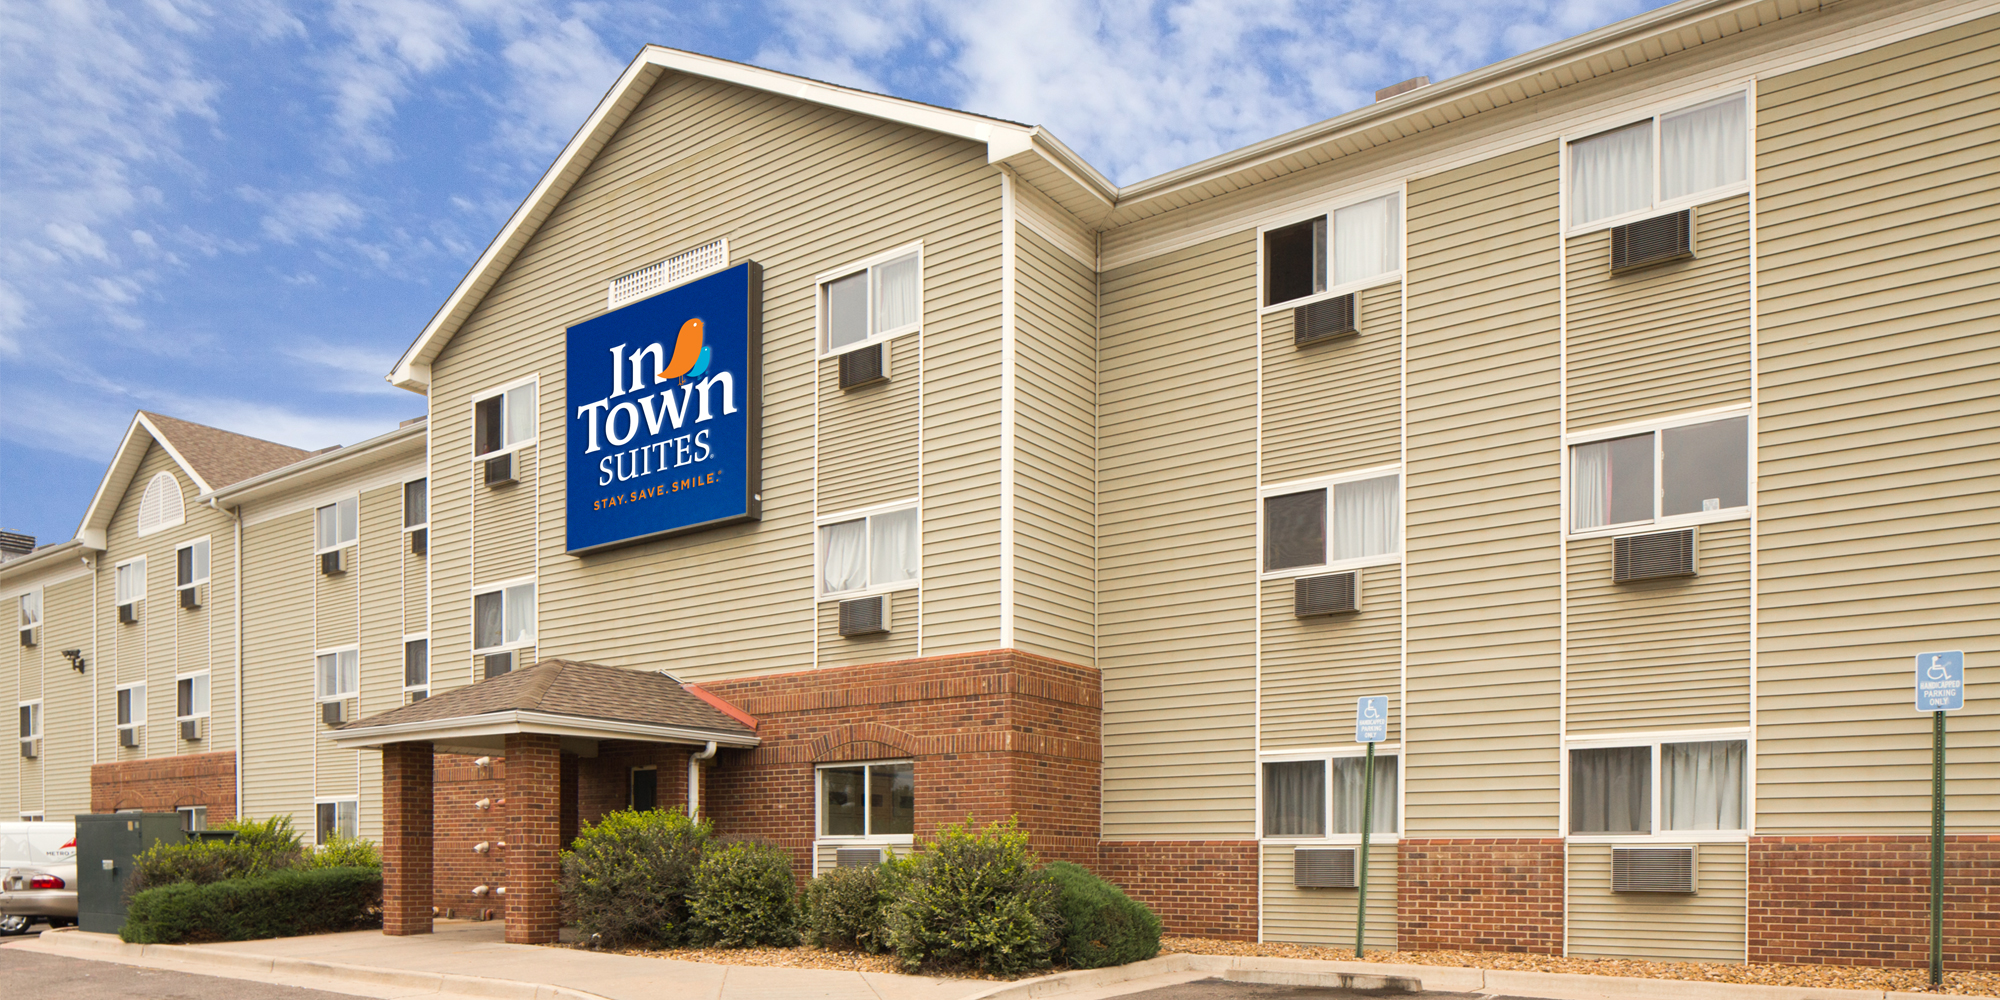 West Denver CO Extended Stay Hotel InTown Suites